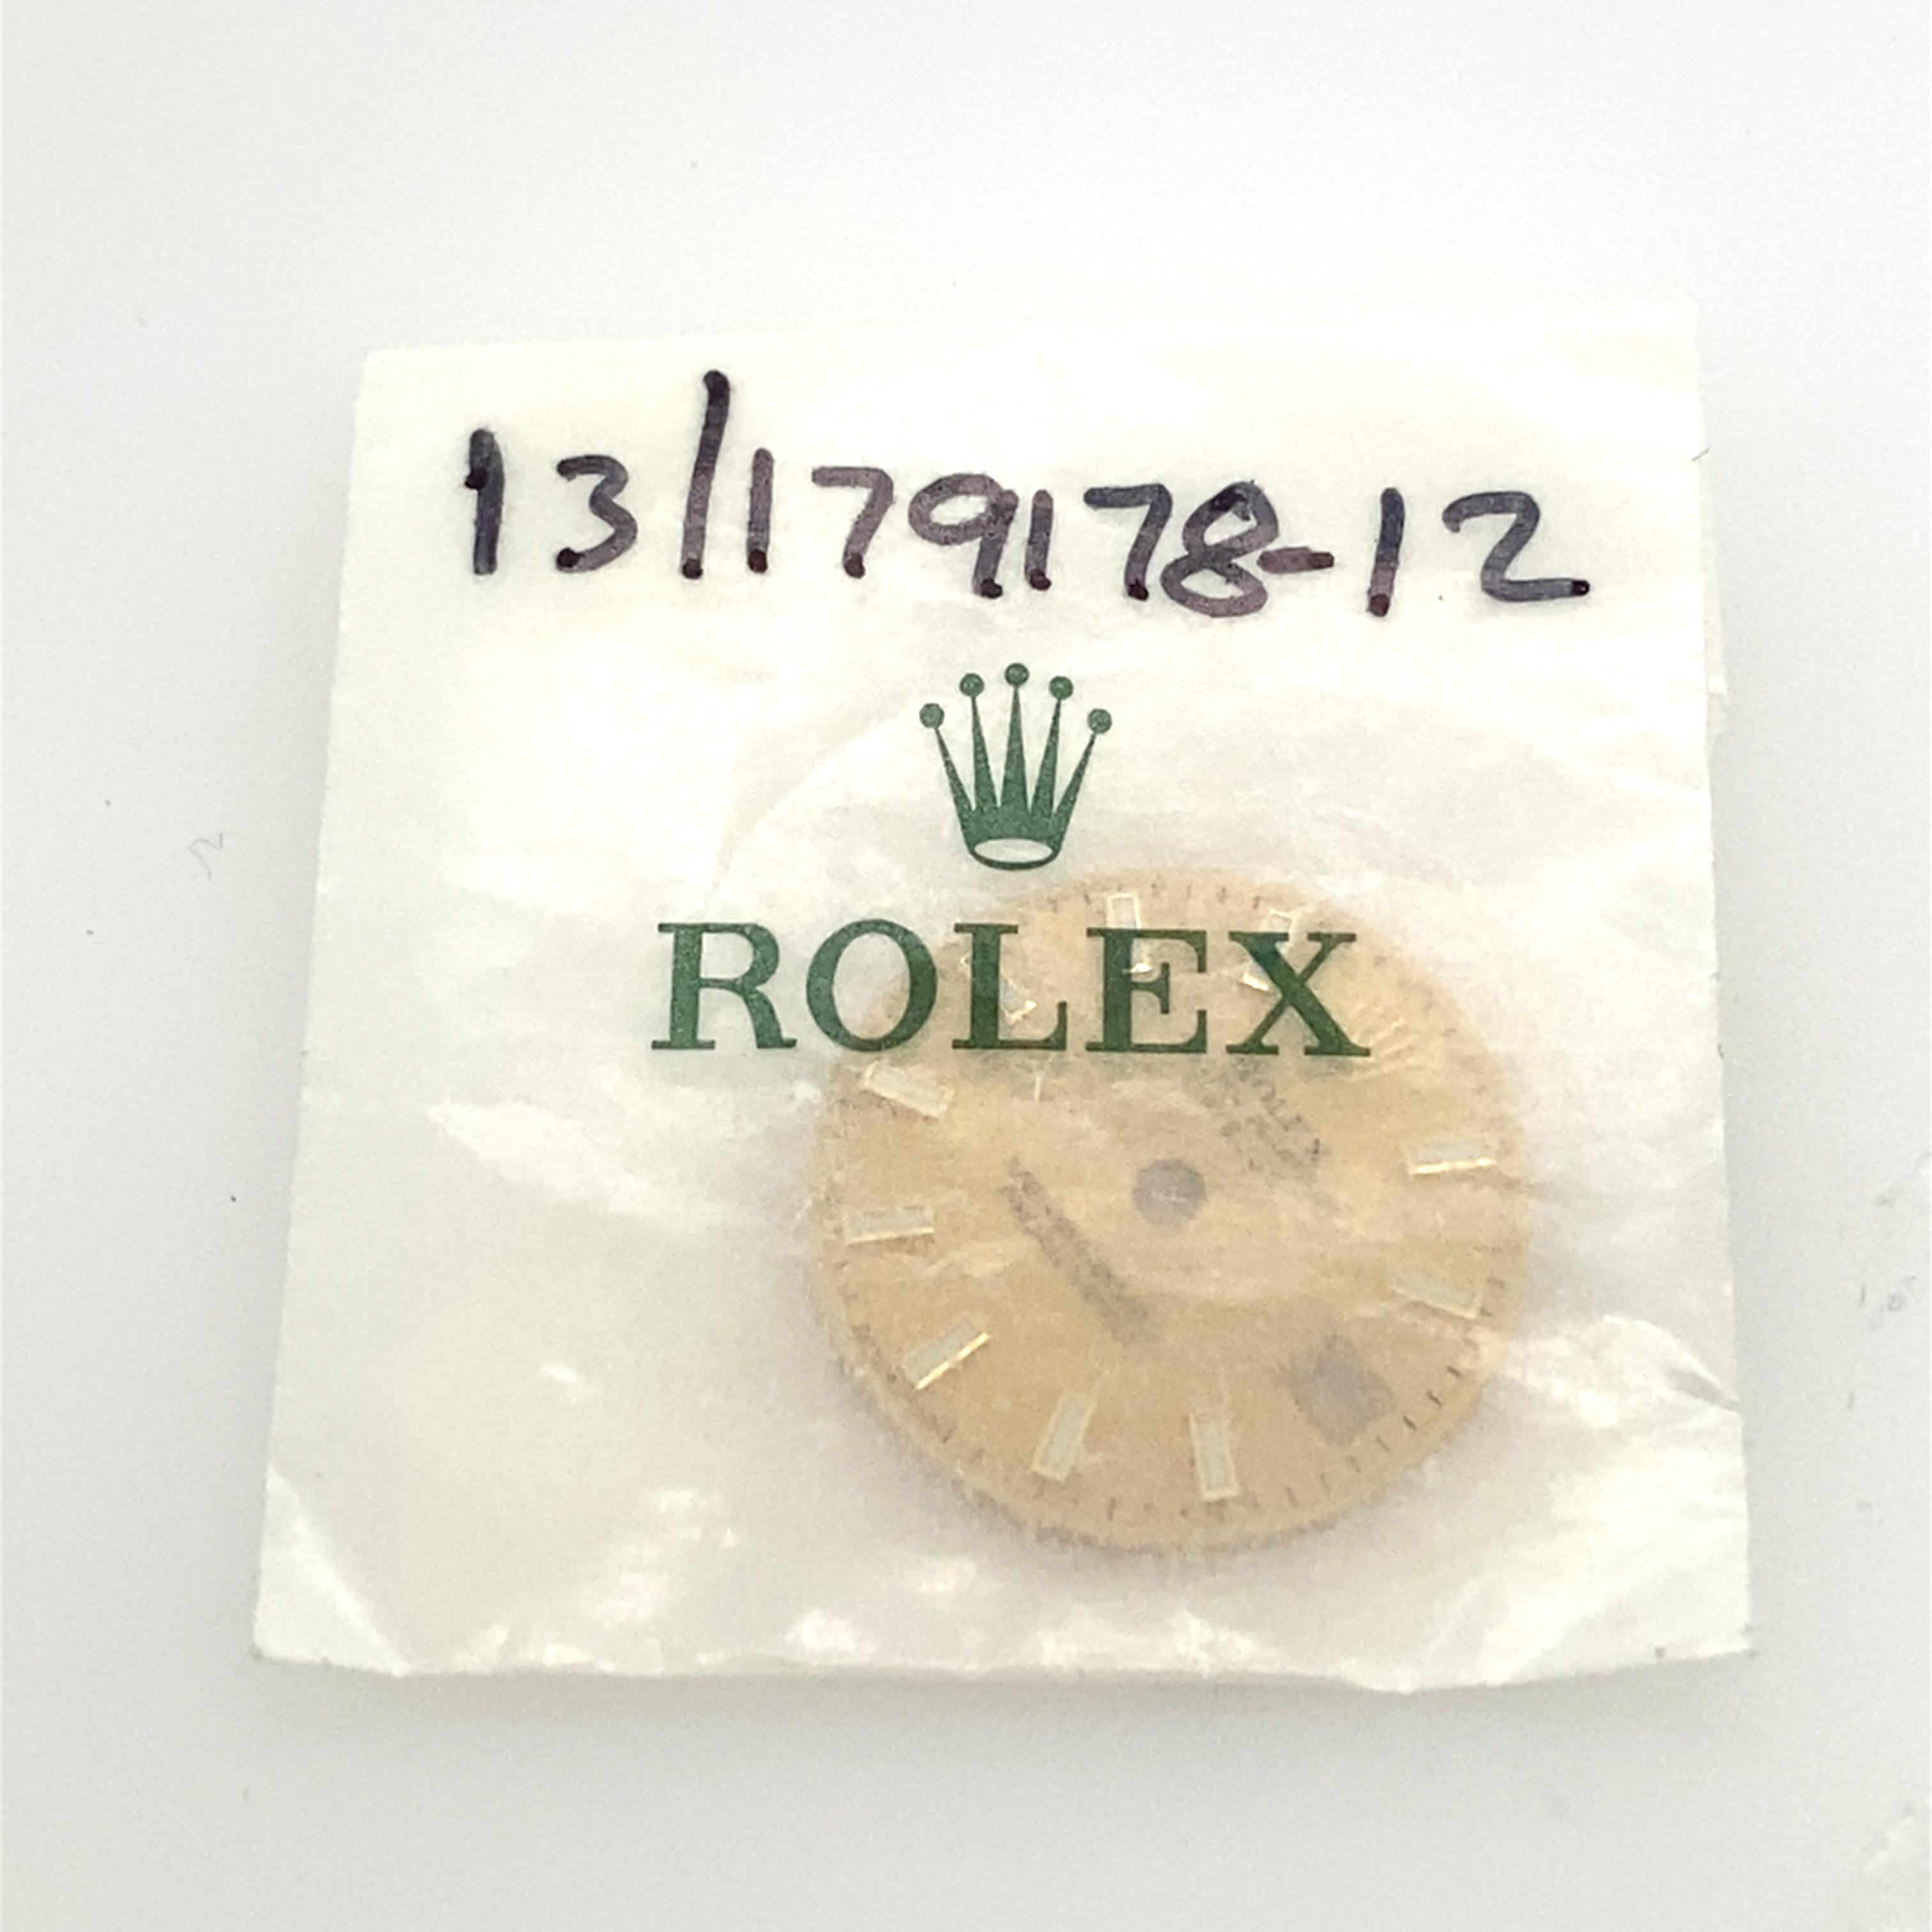 Rolex Watch Dial Oyster Perpetual Date Just 13/179178-12 In Excellent Condition For Sale In London, GB